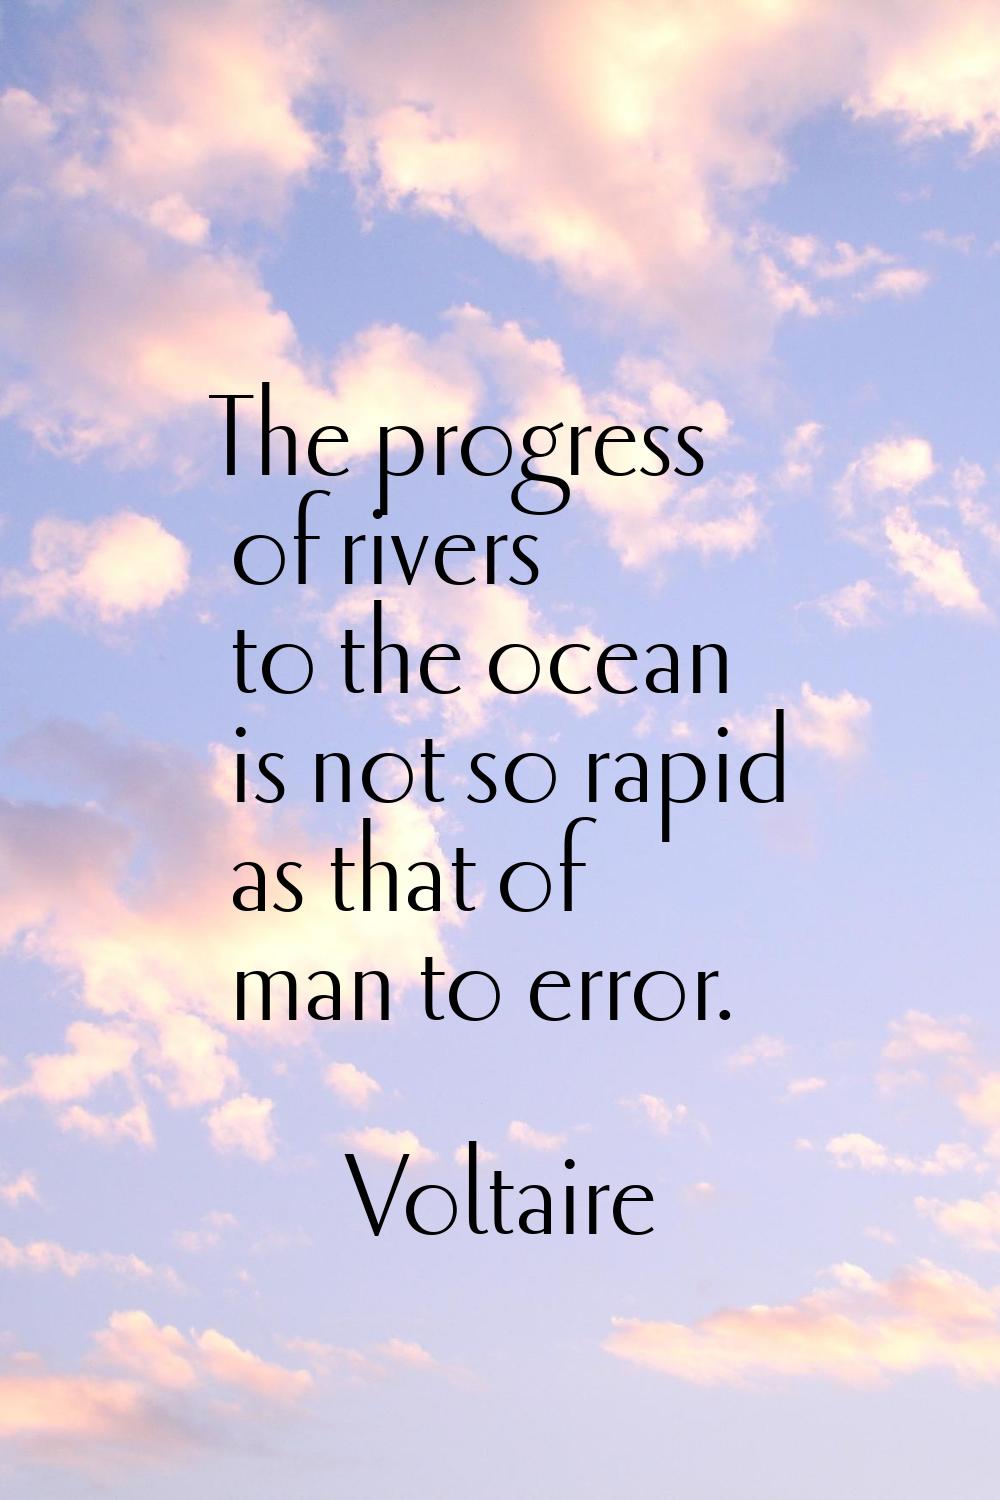 The progress of rivers to the ocean is not so rapid as that of man to error.